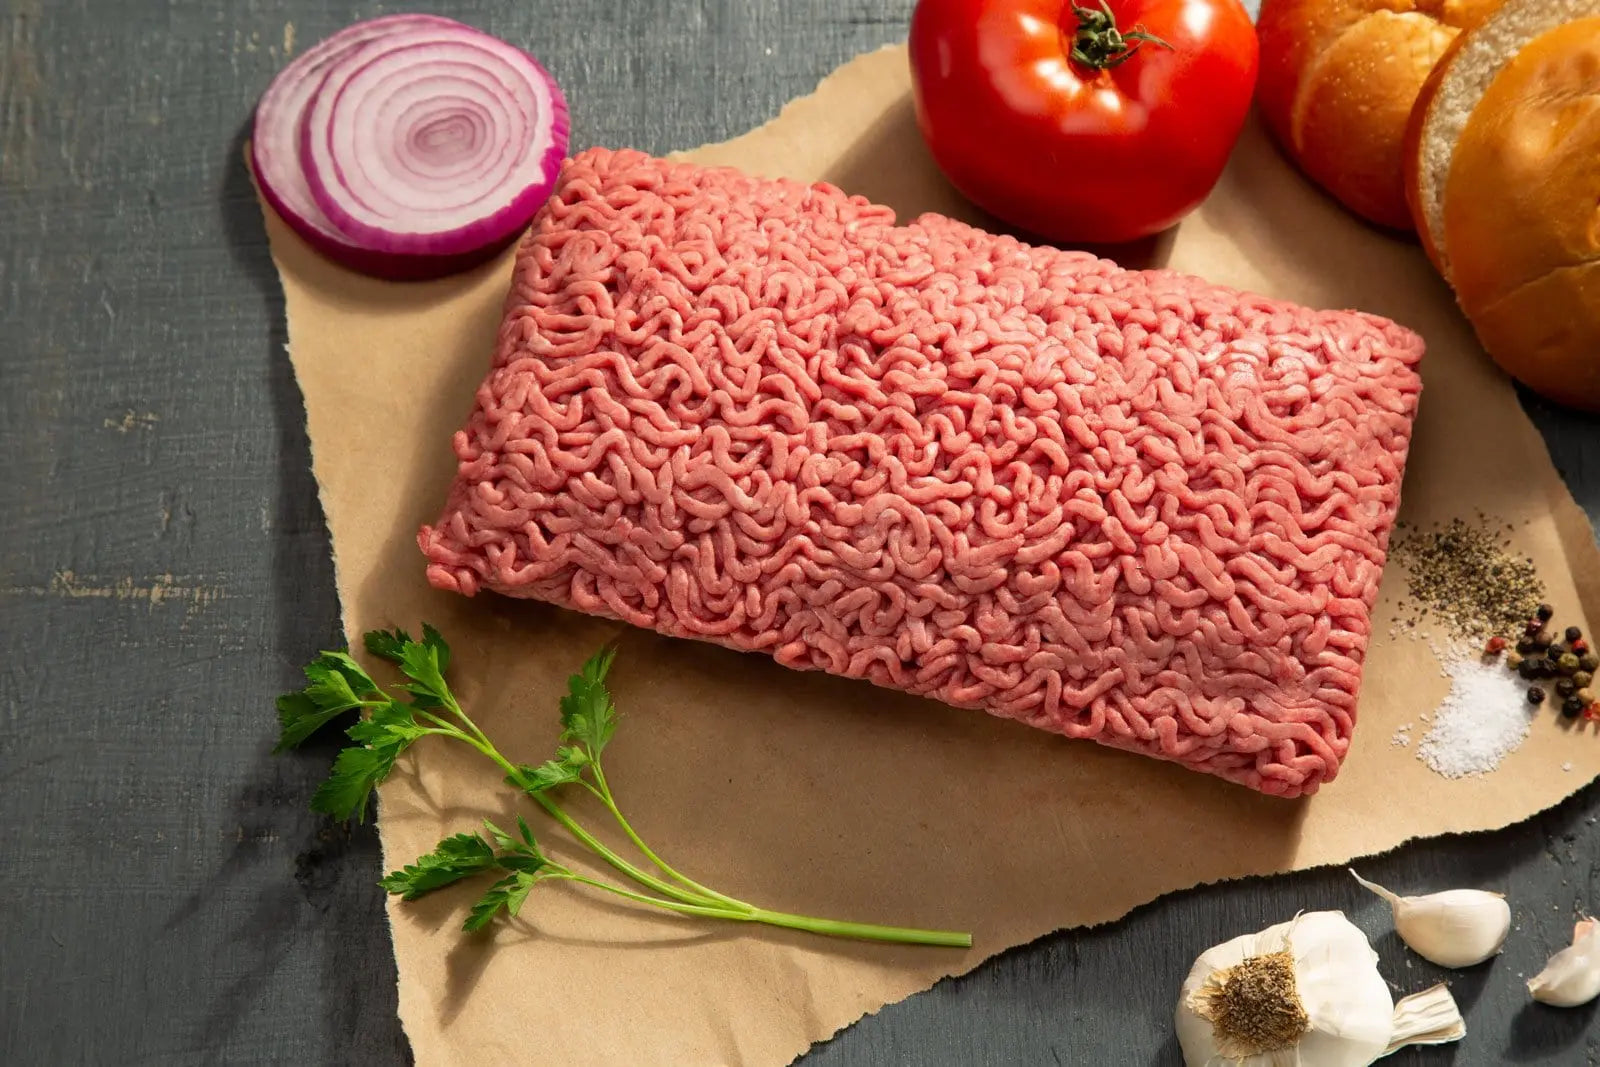 Ground Beef - 1lb Packages Prosper Meats